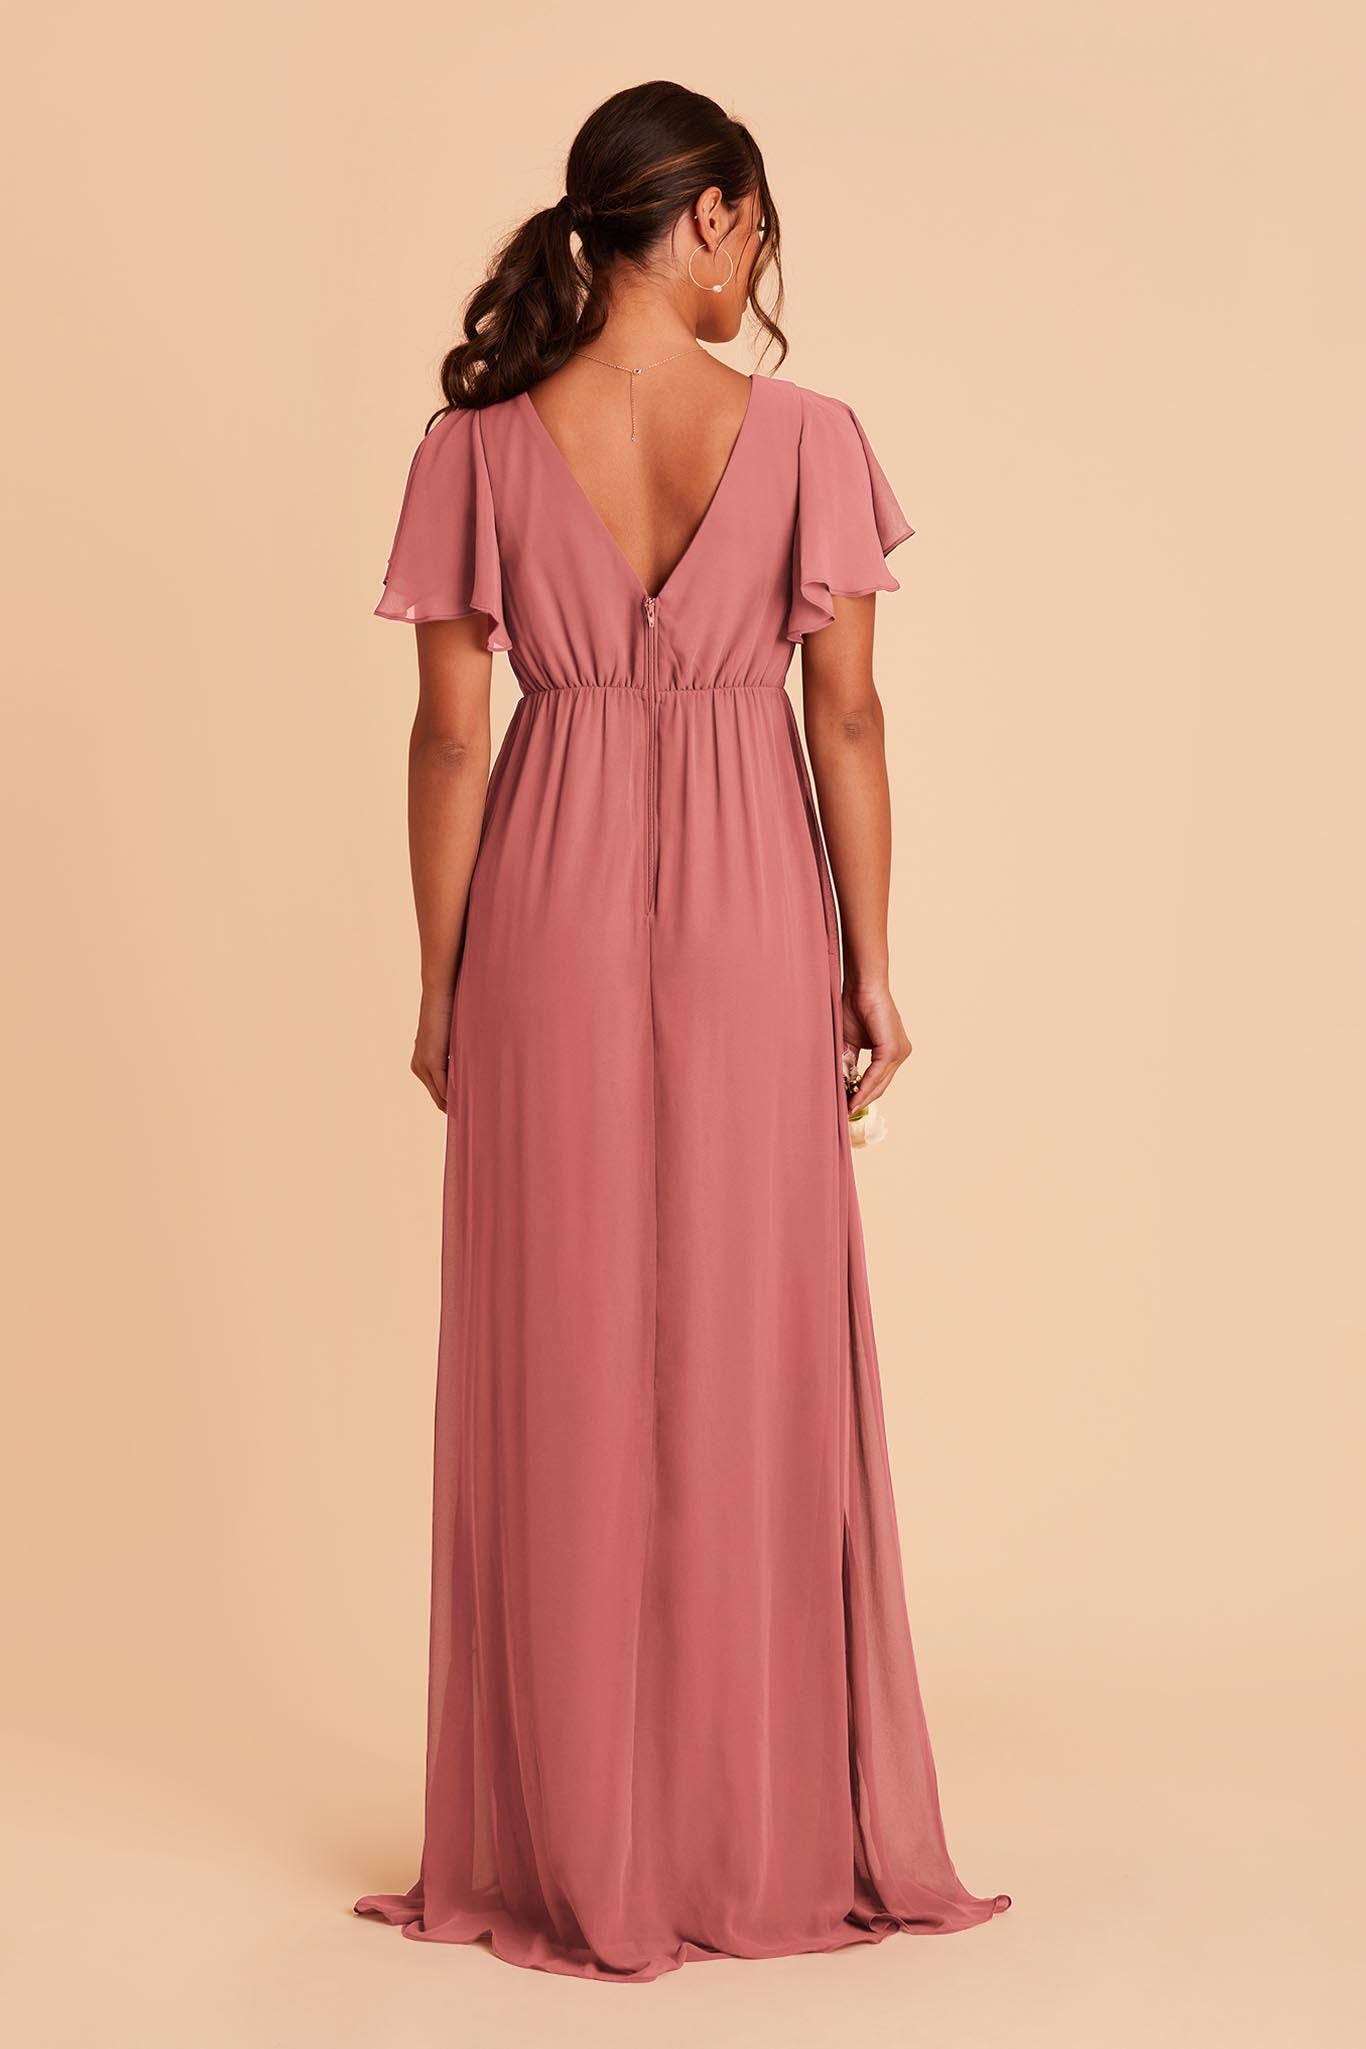 Mulberry Hannah Empire Dress by Birdy Grey